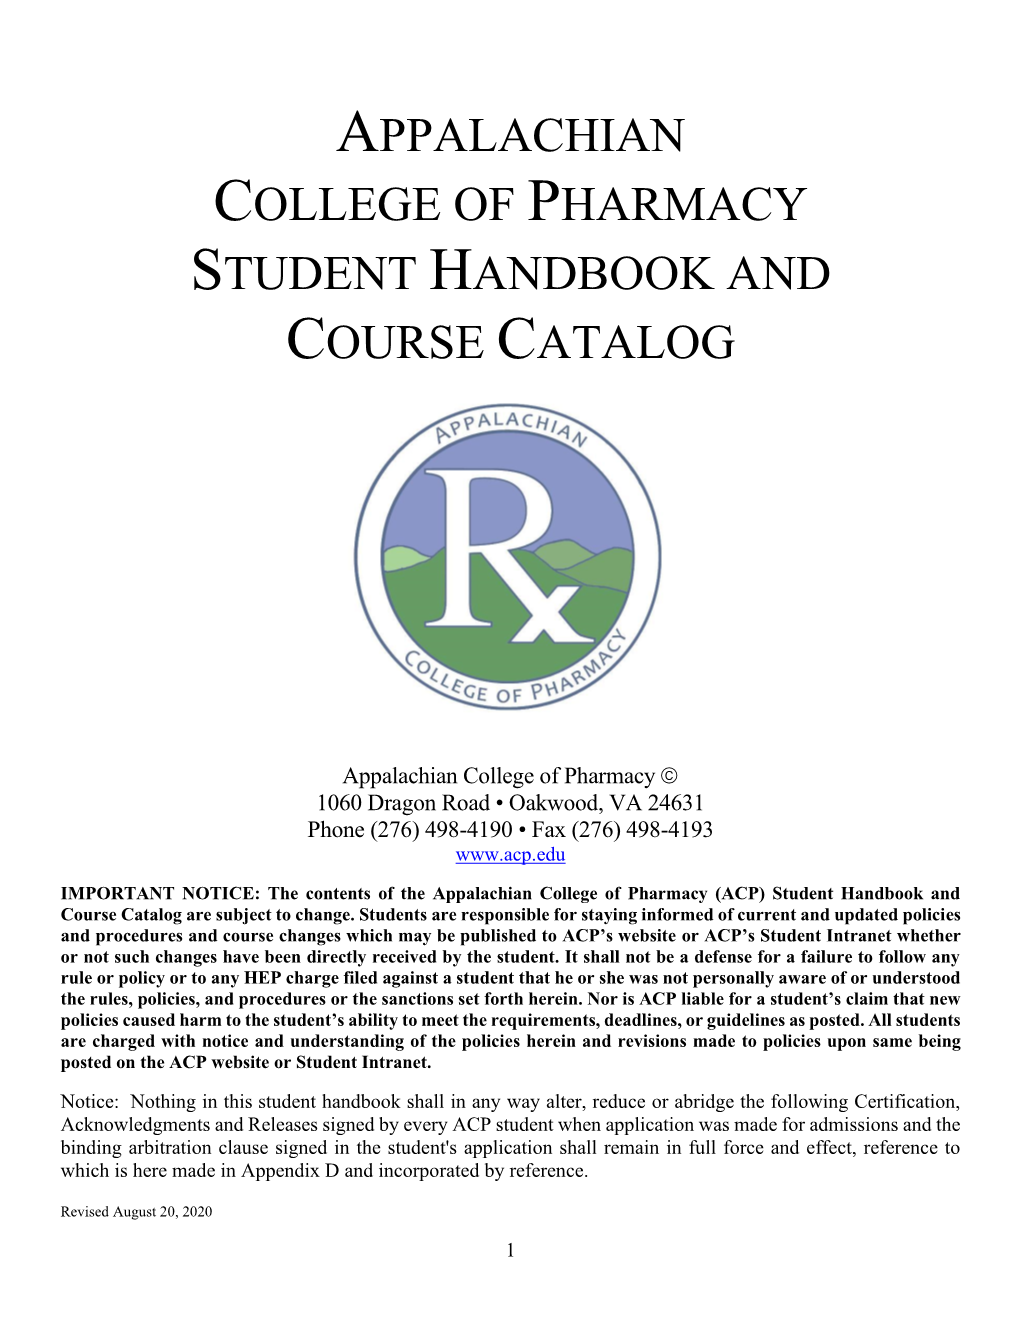 Student Handbook and Course Catalog